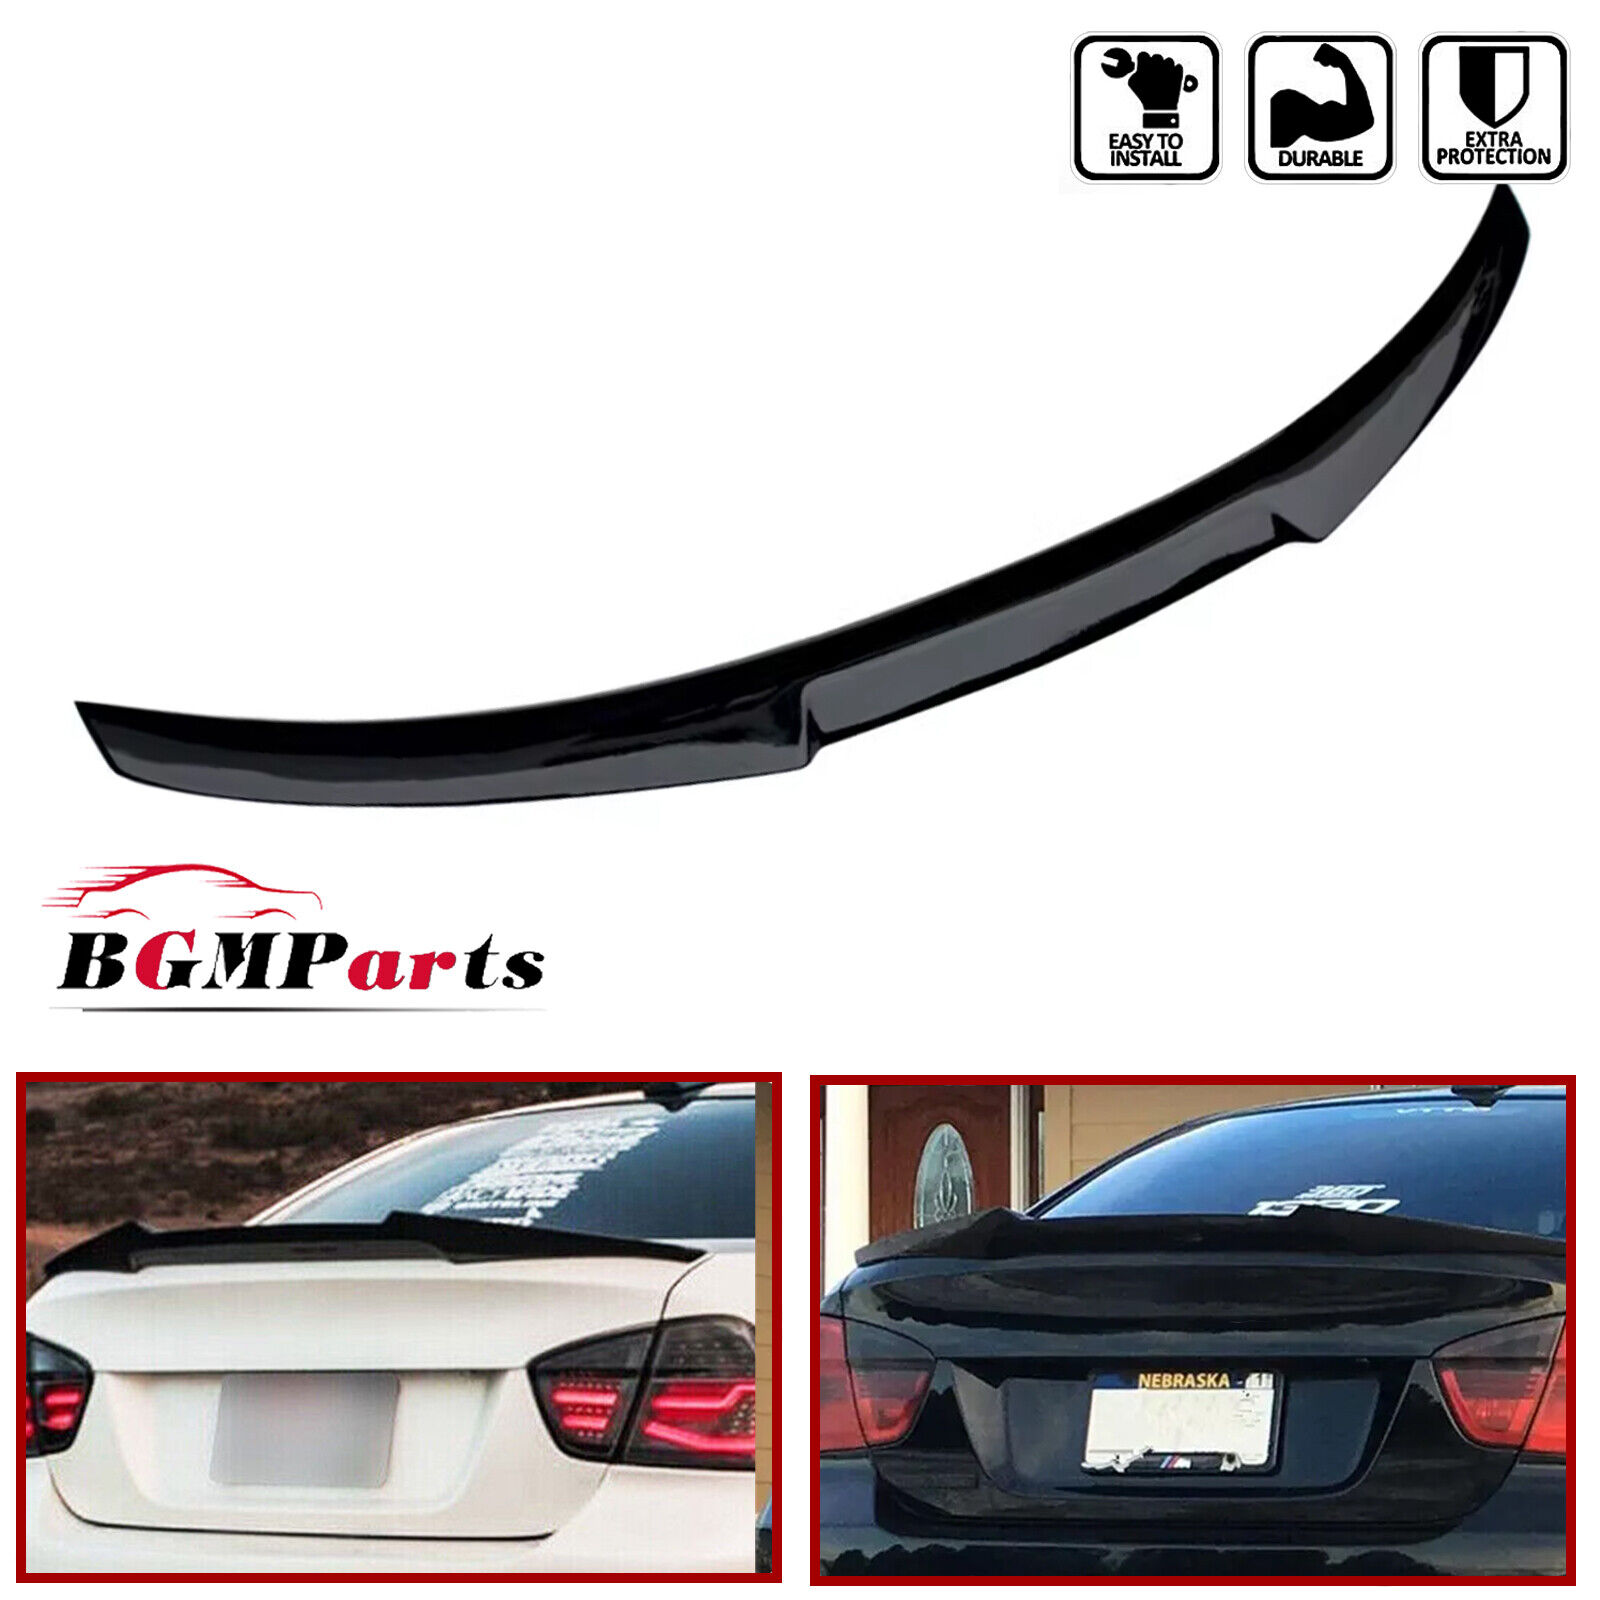 Rear Spoiler Wing Trunk Wing For 2006-2011 BMW E90 328i 335i 3 Series 4-Door